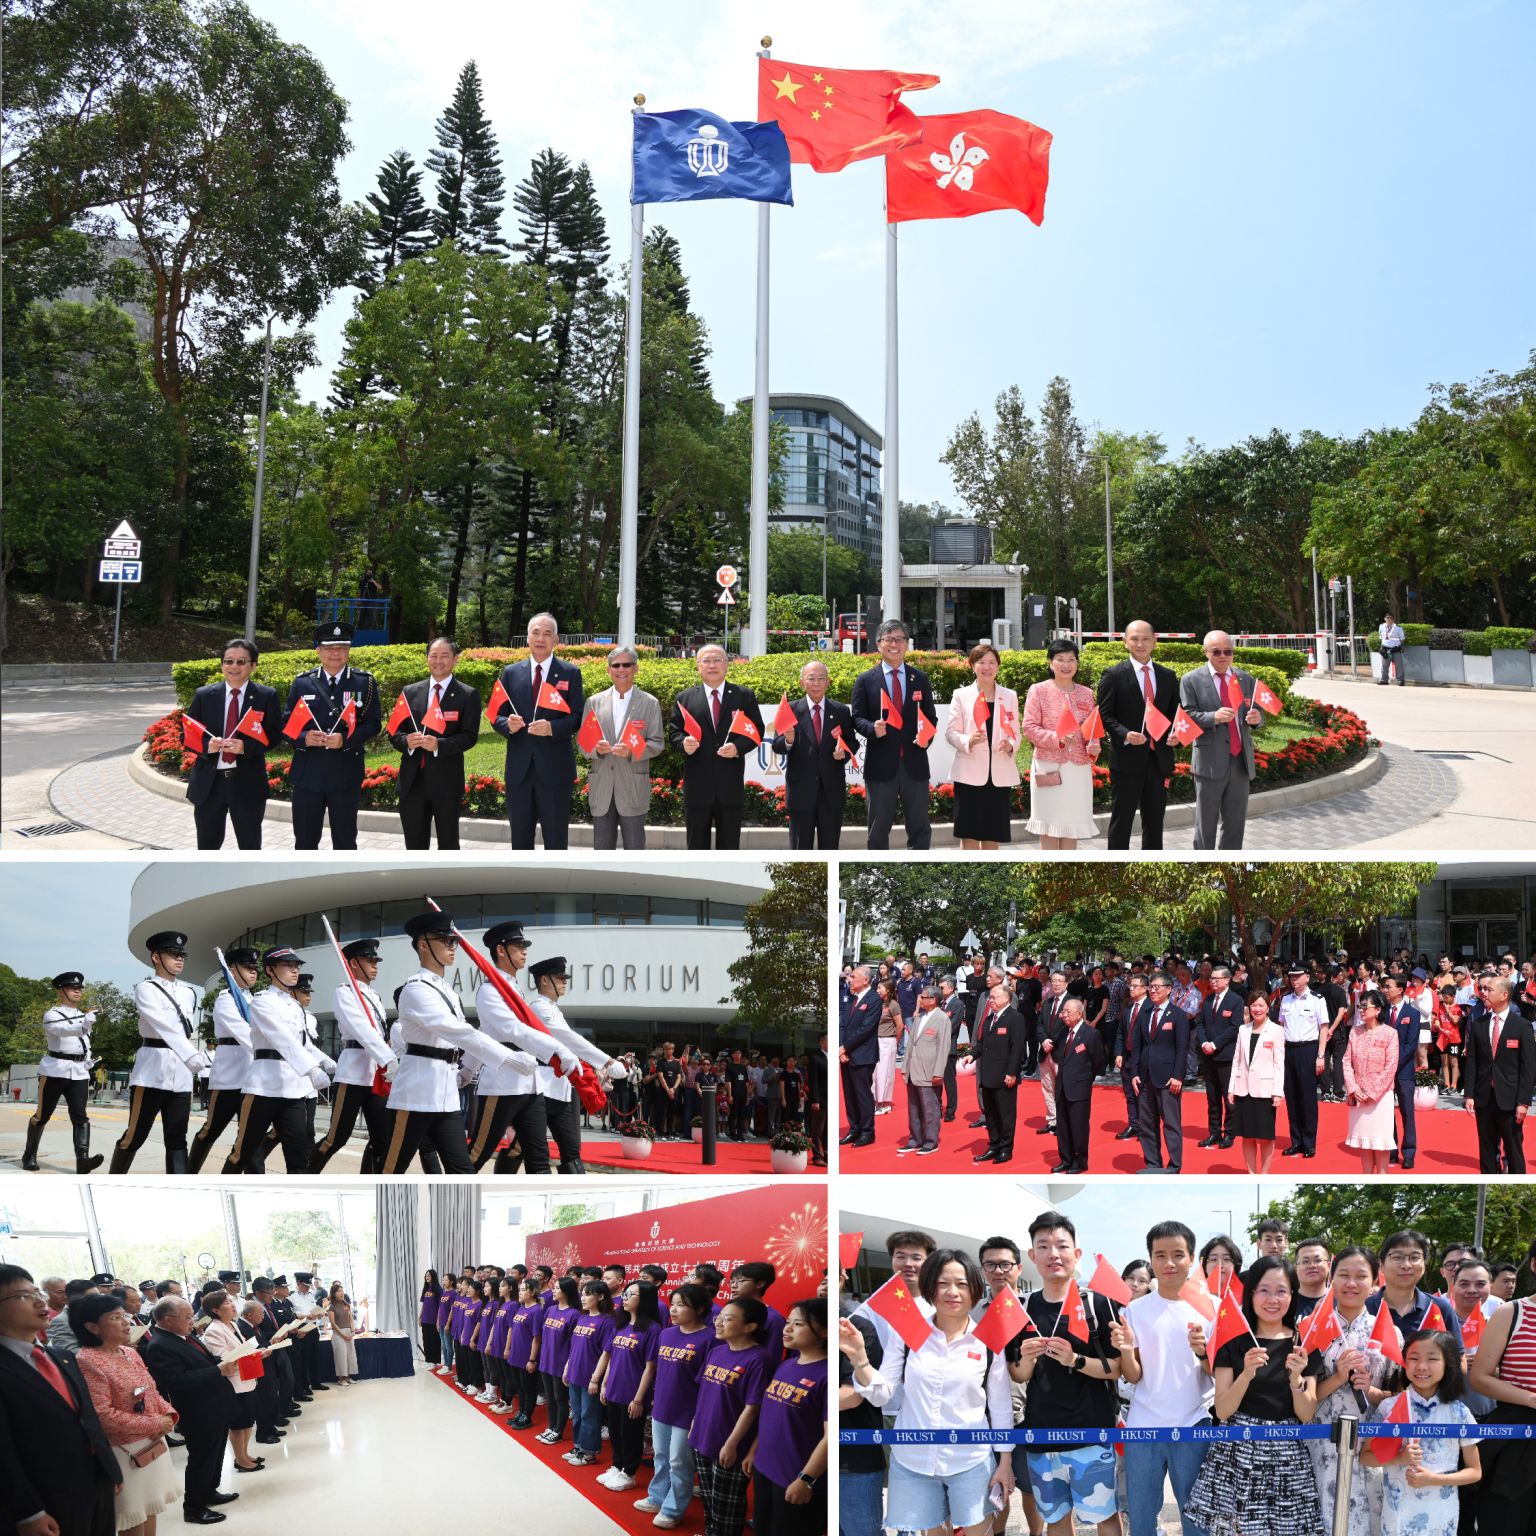 In honor of the 74th Anniversary of the Founding of the People’s Republic of China, the Hong Kong University of Science and Technology (HKUST) conducted a flag-raising ceremony on its campus on October 1.